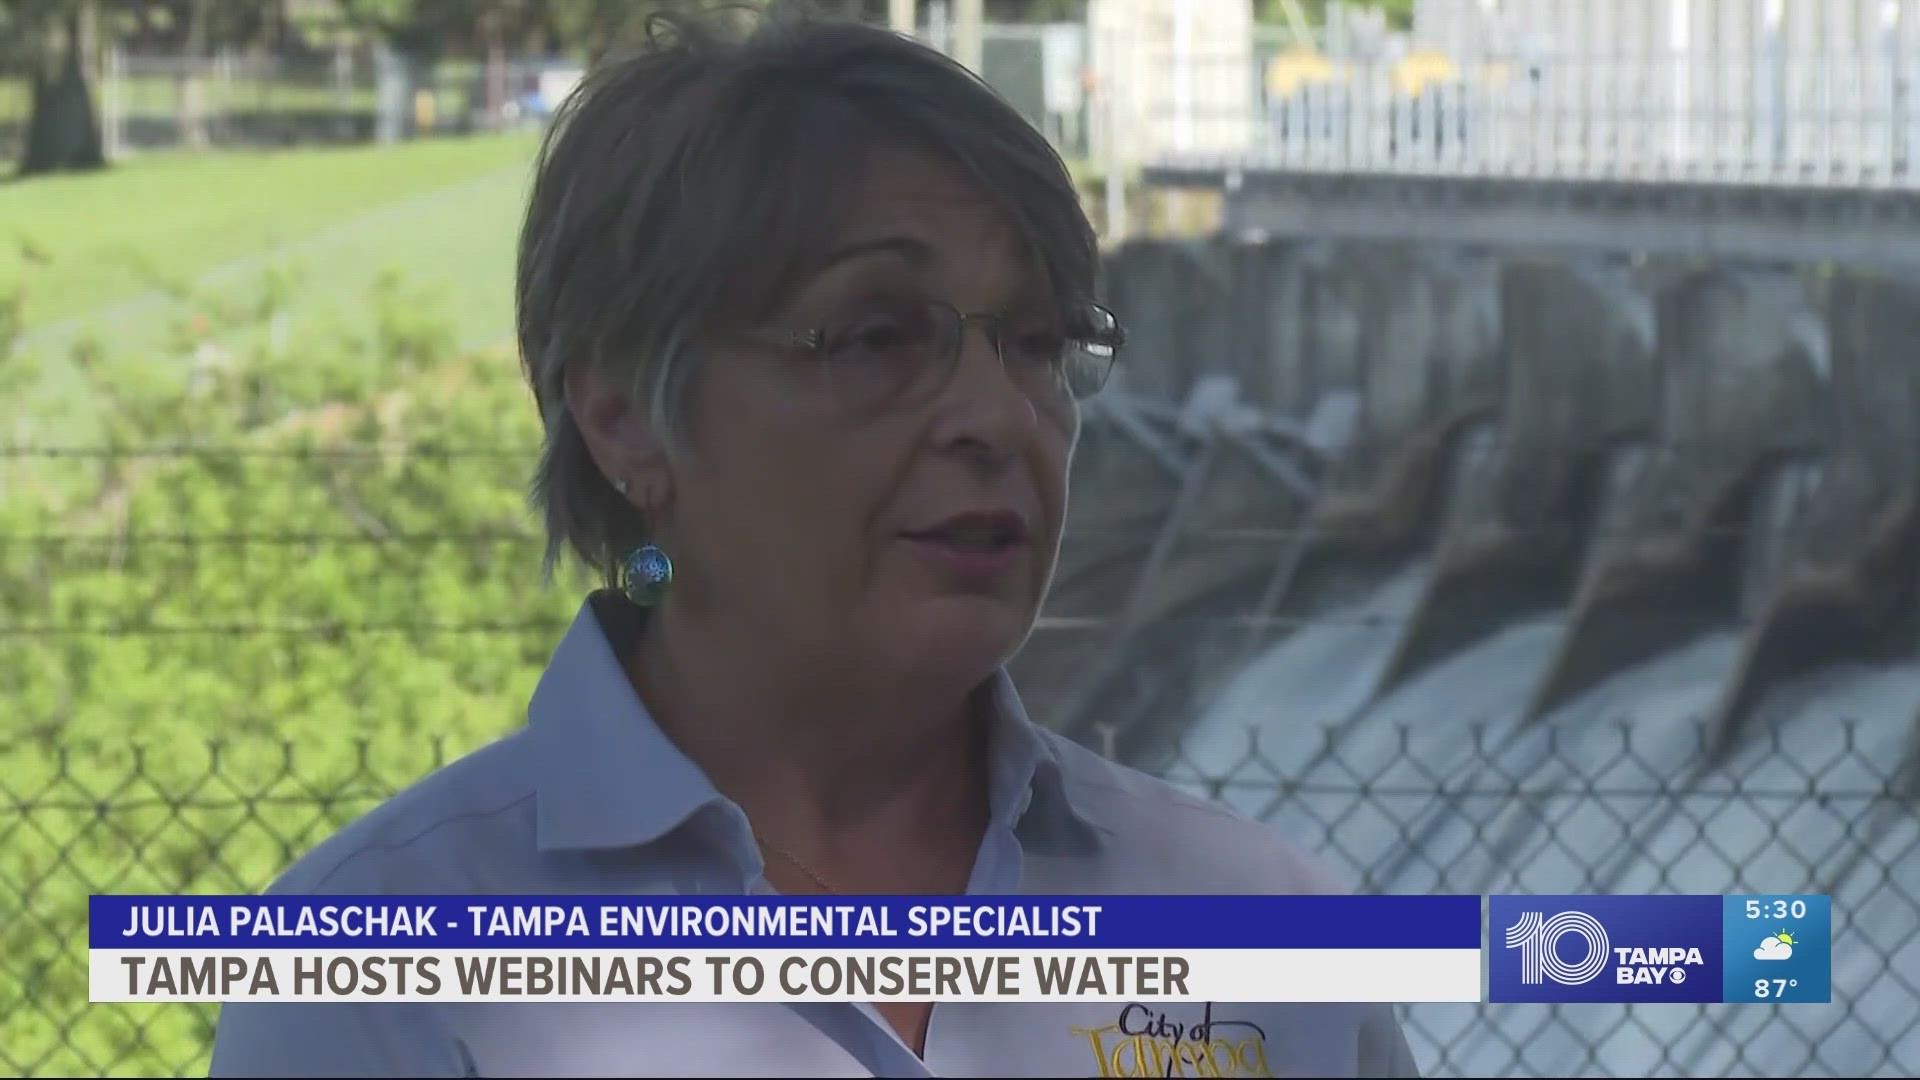 In order to help offset the increased demand for water, Tampa Mayor Jane Castor said for the second time this year, the city is buying additional water from Tampa Ba